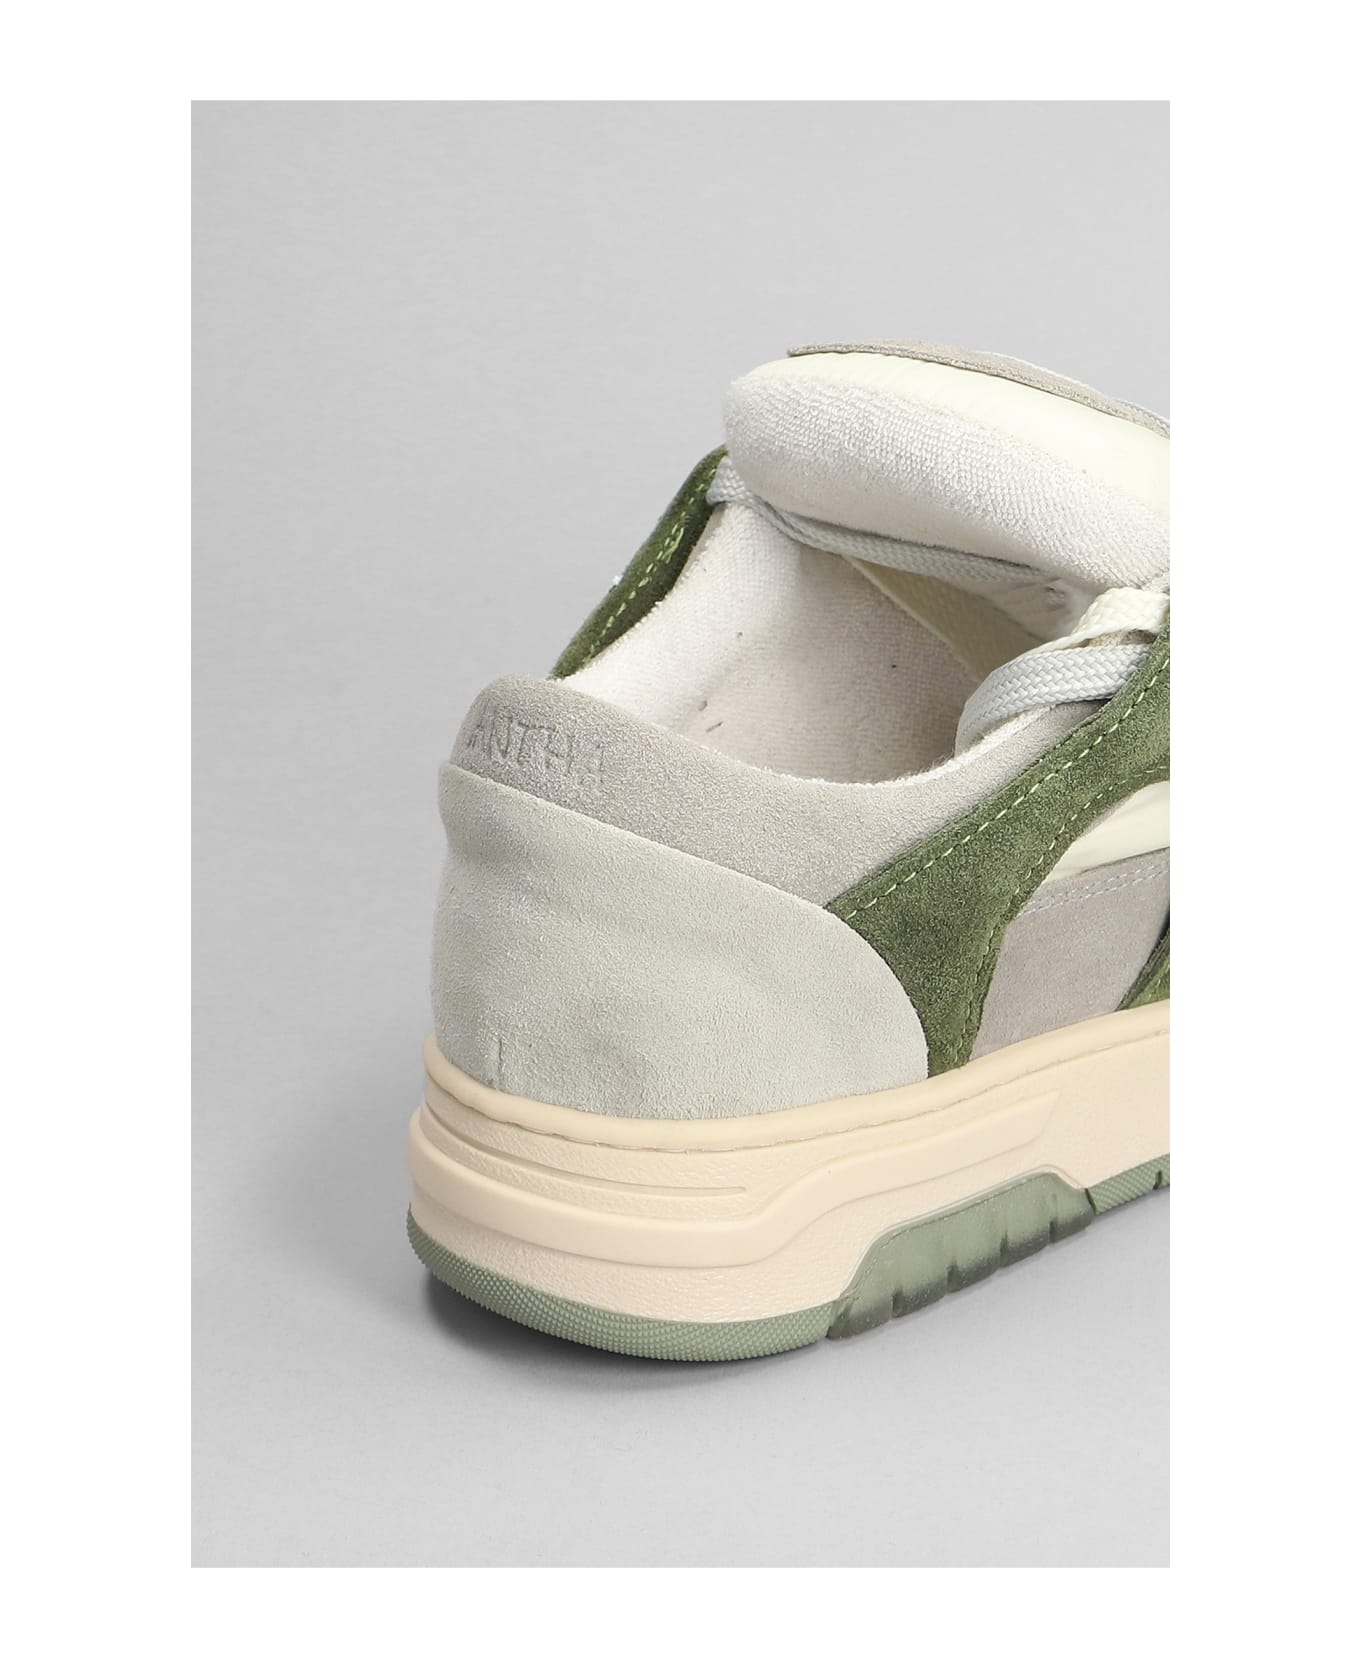 Paura Santha 1 Sneakers In Green Suede And Fabric - green スニーカー